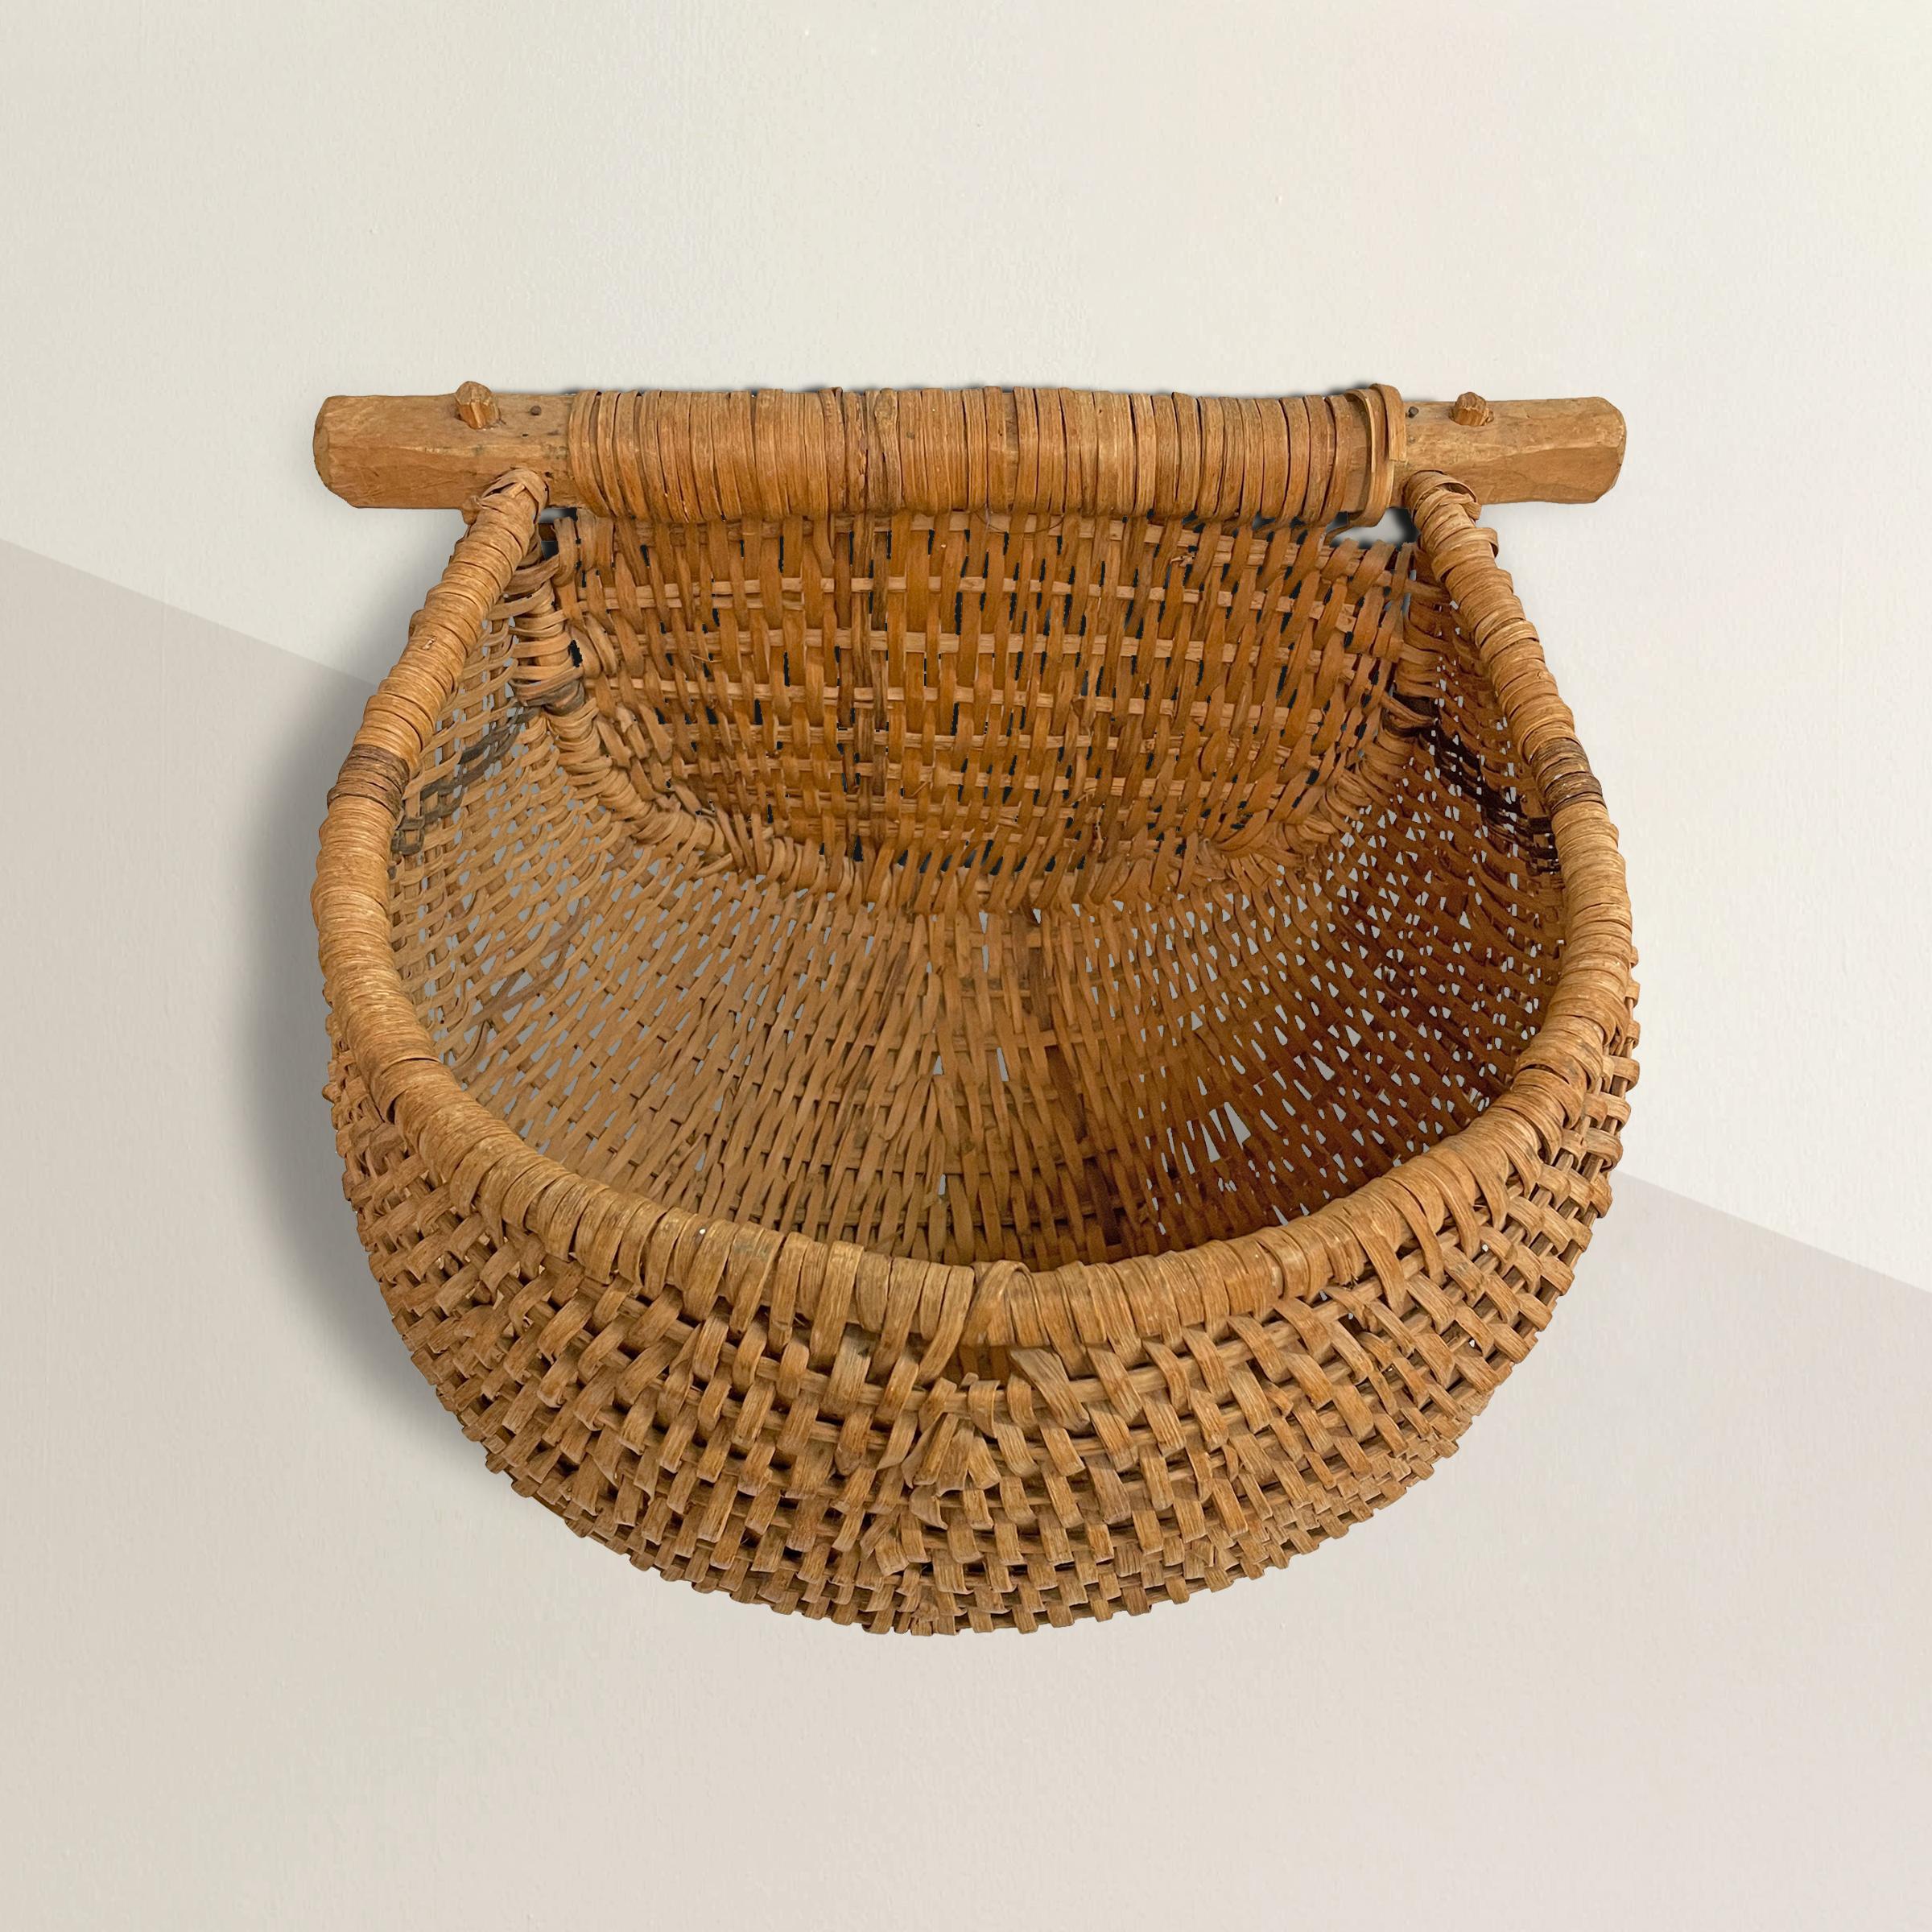 Early 20th century oak splint gathering basket with a large wood handle and plenty of room for holding berries, vegetables, or any myriad of floral. Today it's perfect for hanging on a wall and filling with seasonal flowers from your garden.